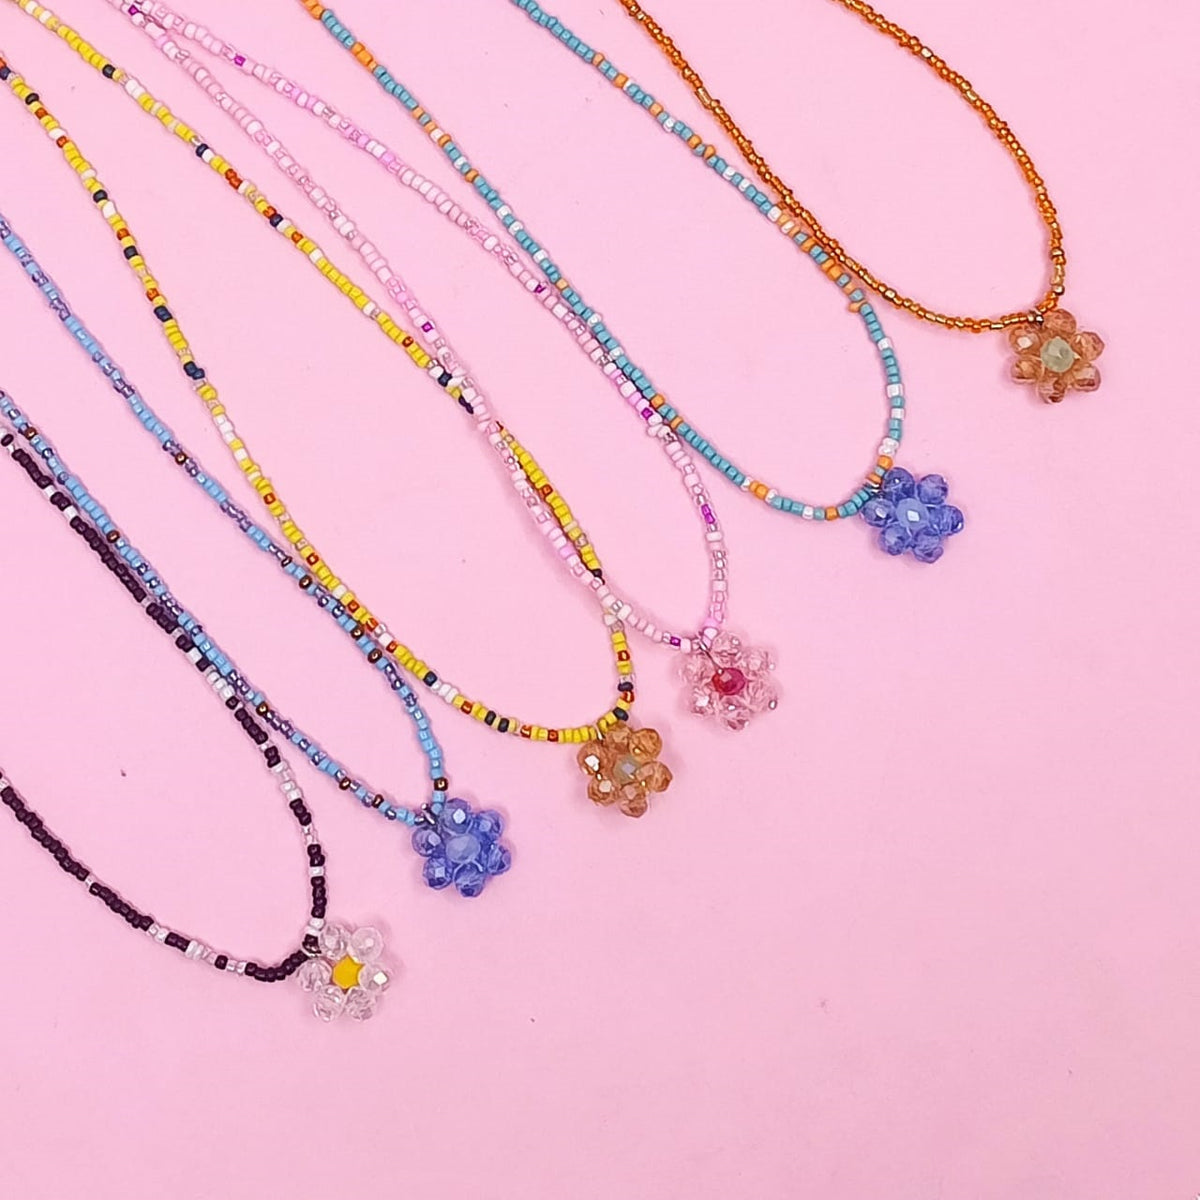 Flower Multi Beads Necklace - Style 2